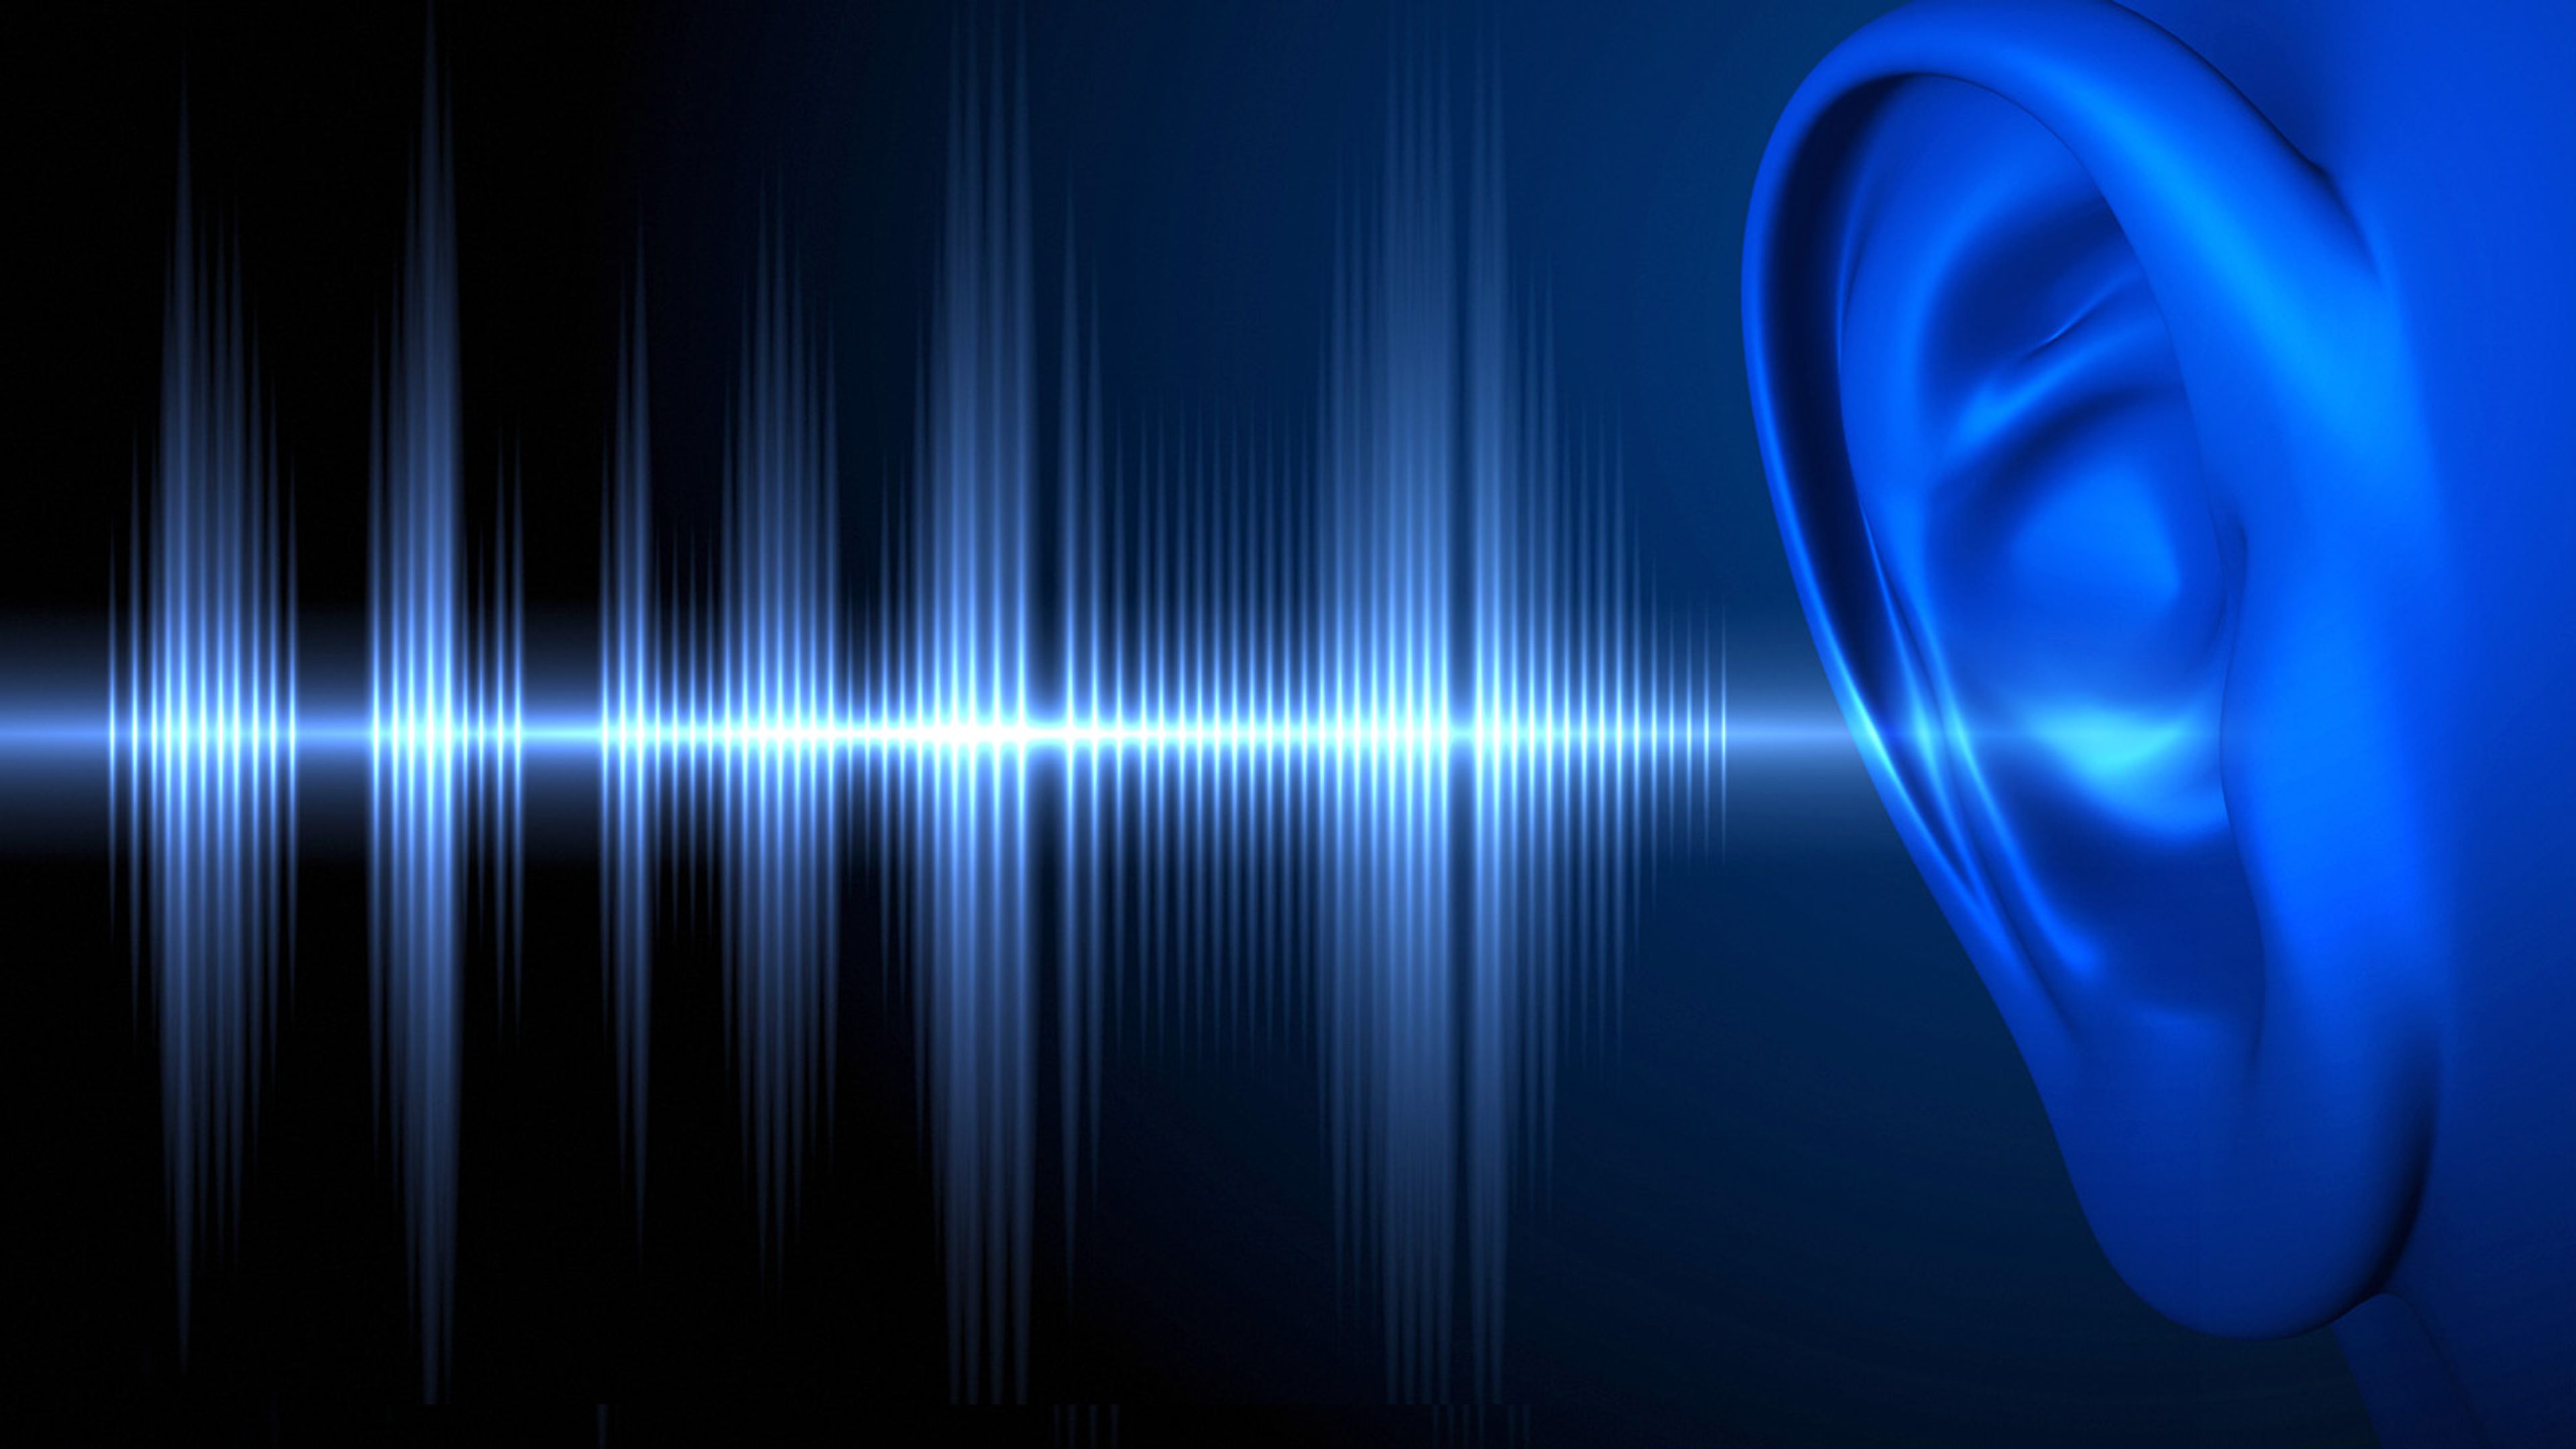 Digital image of an ear with a sound signal transmitting into it